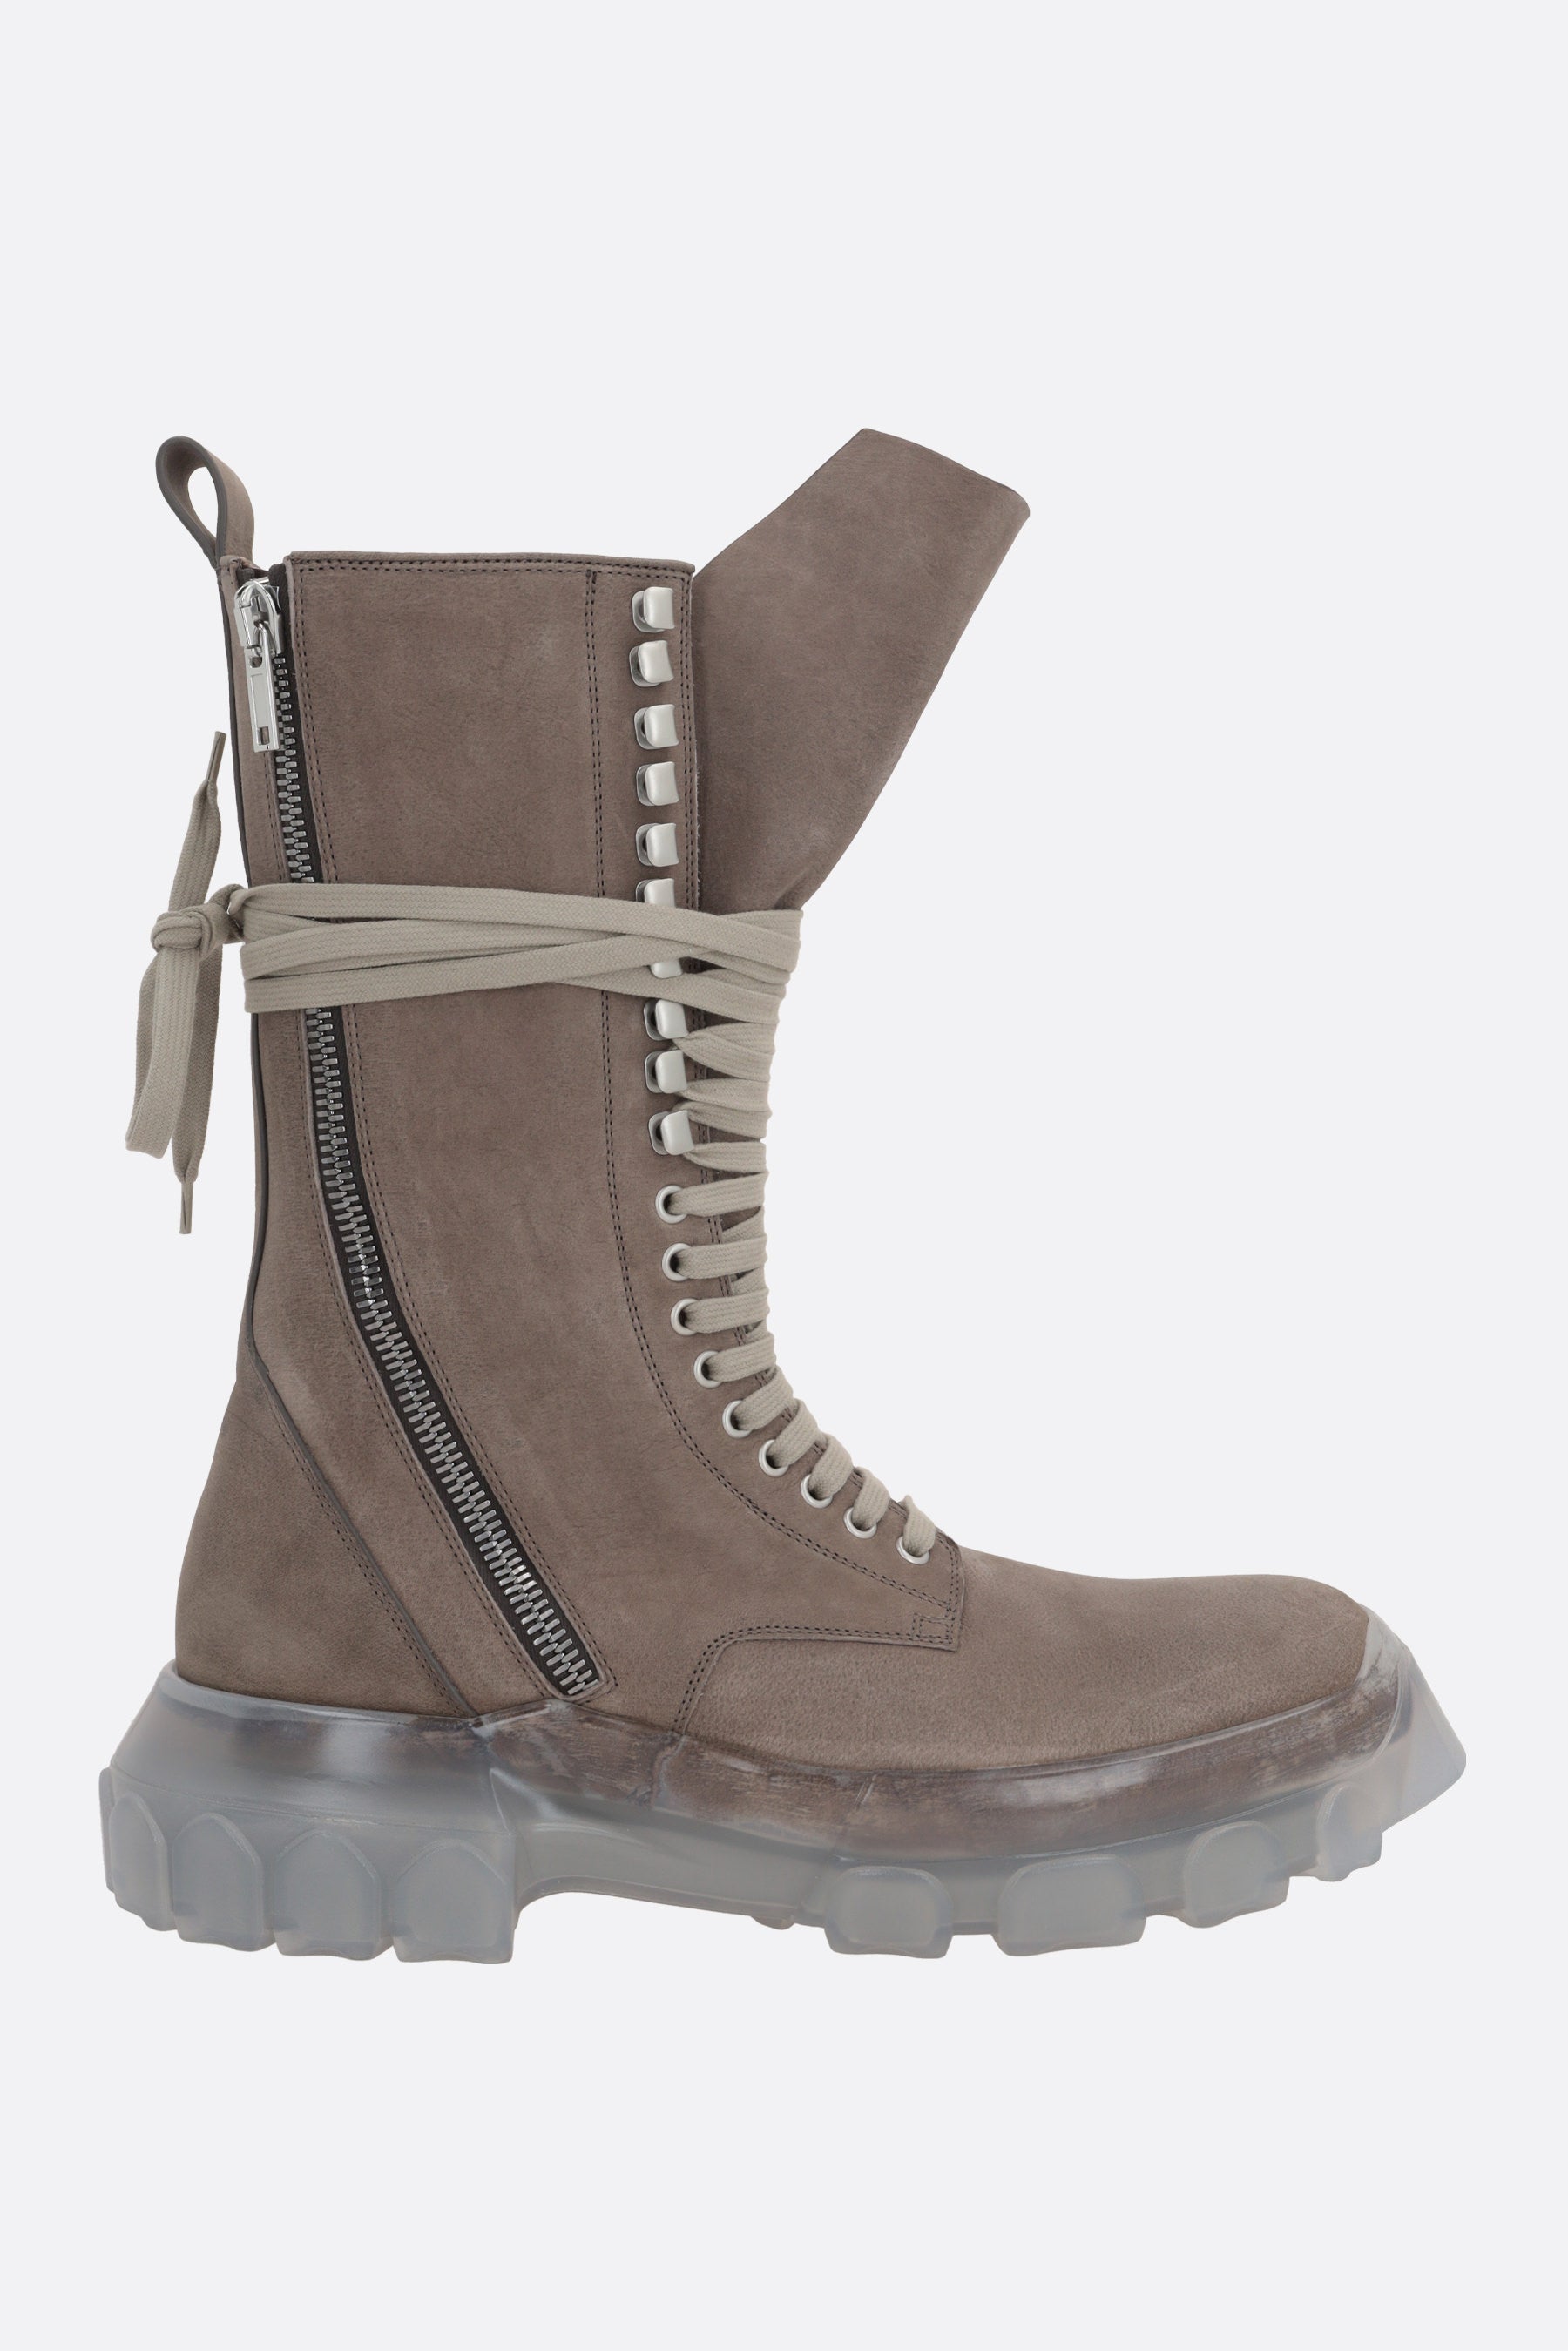 Army Tractor nabuk combat boots